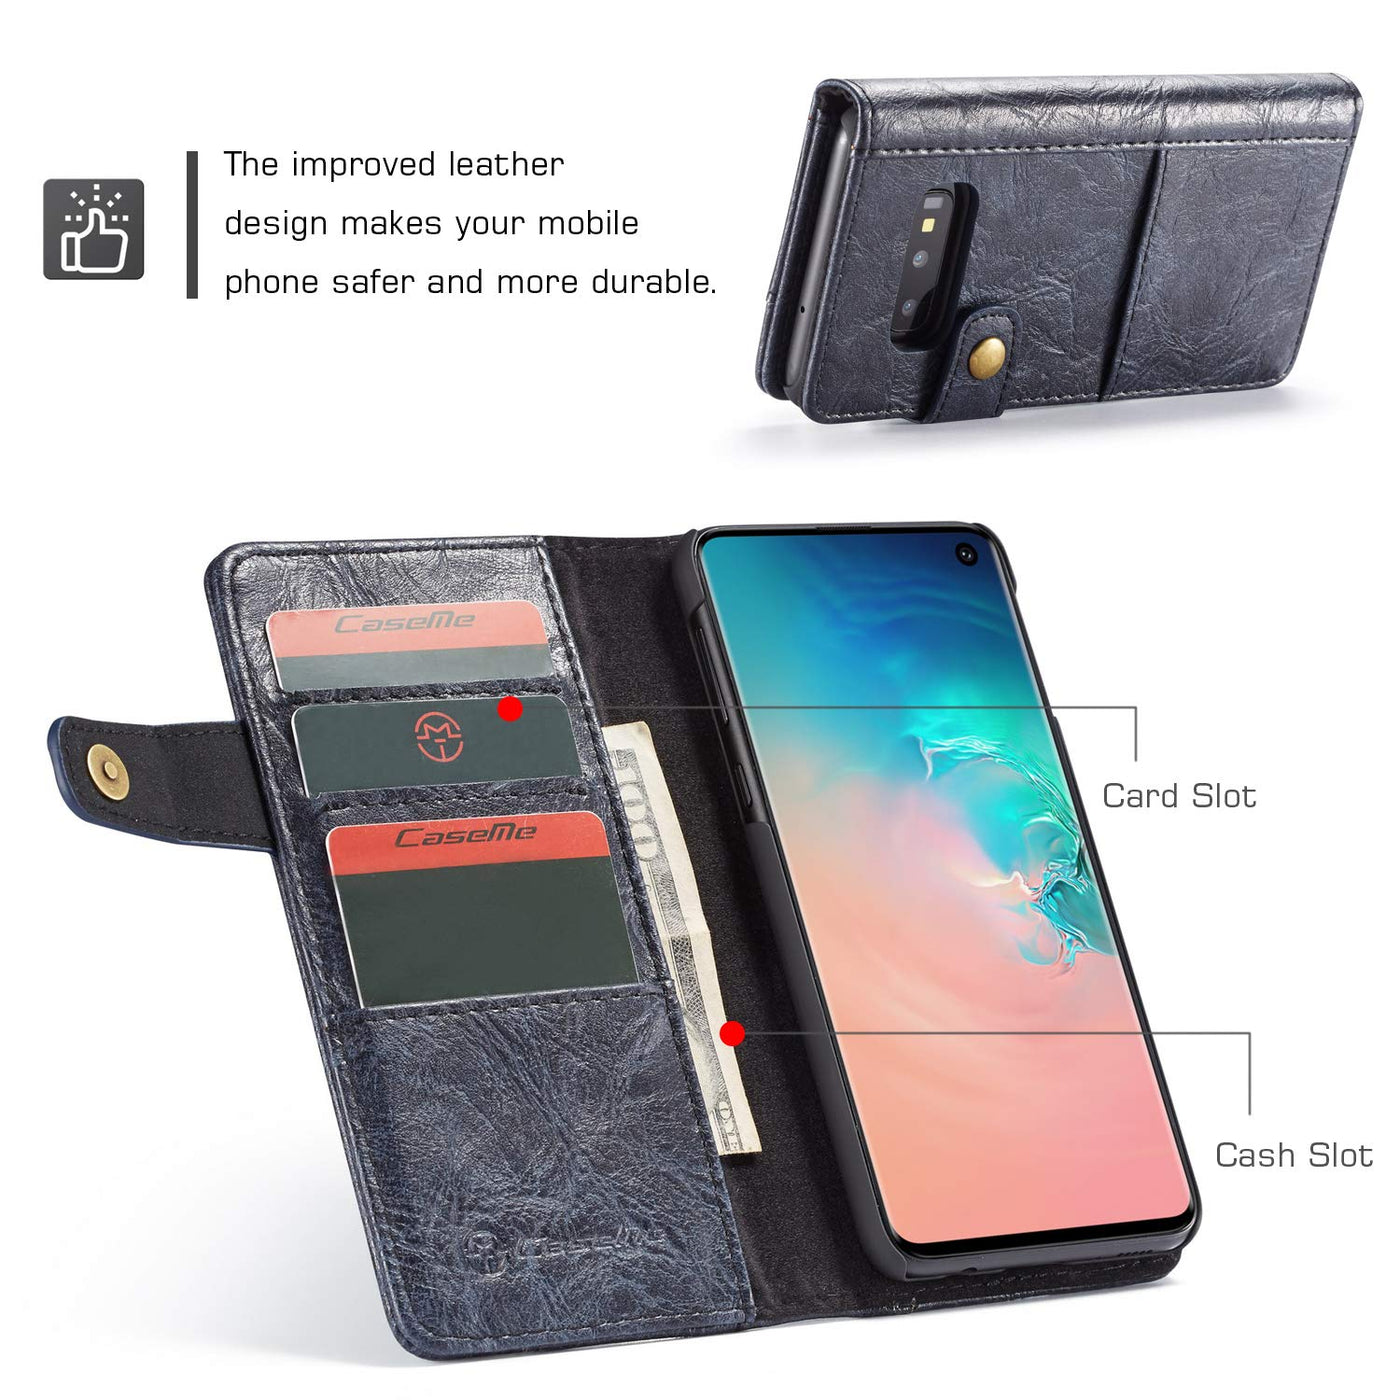 Excelsior Premium Leather Wallet flip Cover Case For Samsung Galaxy S10e (2019)